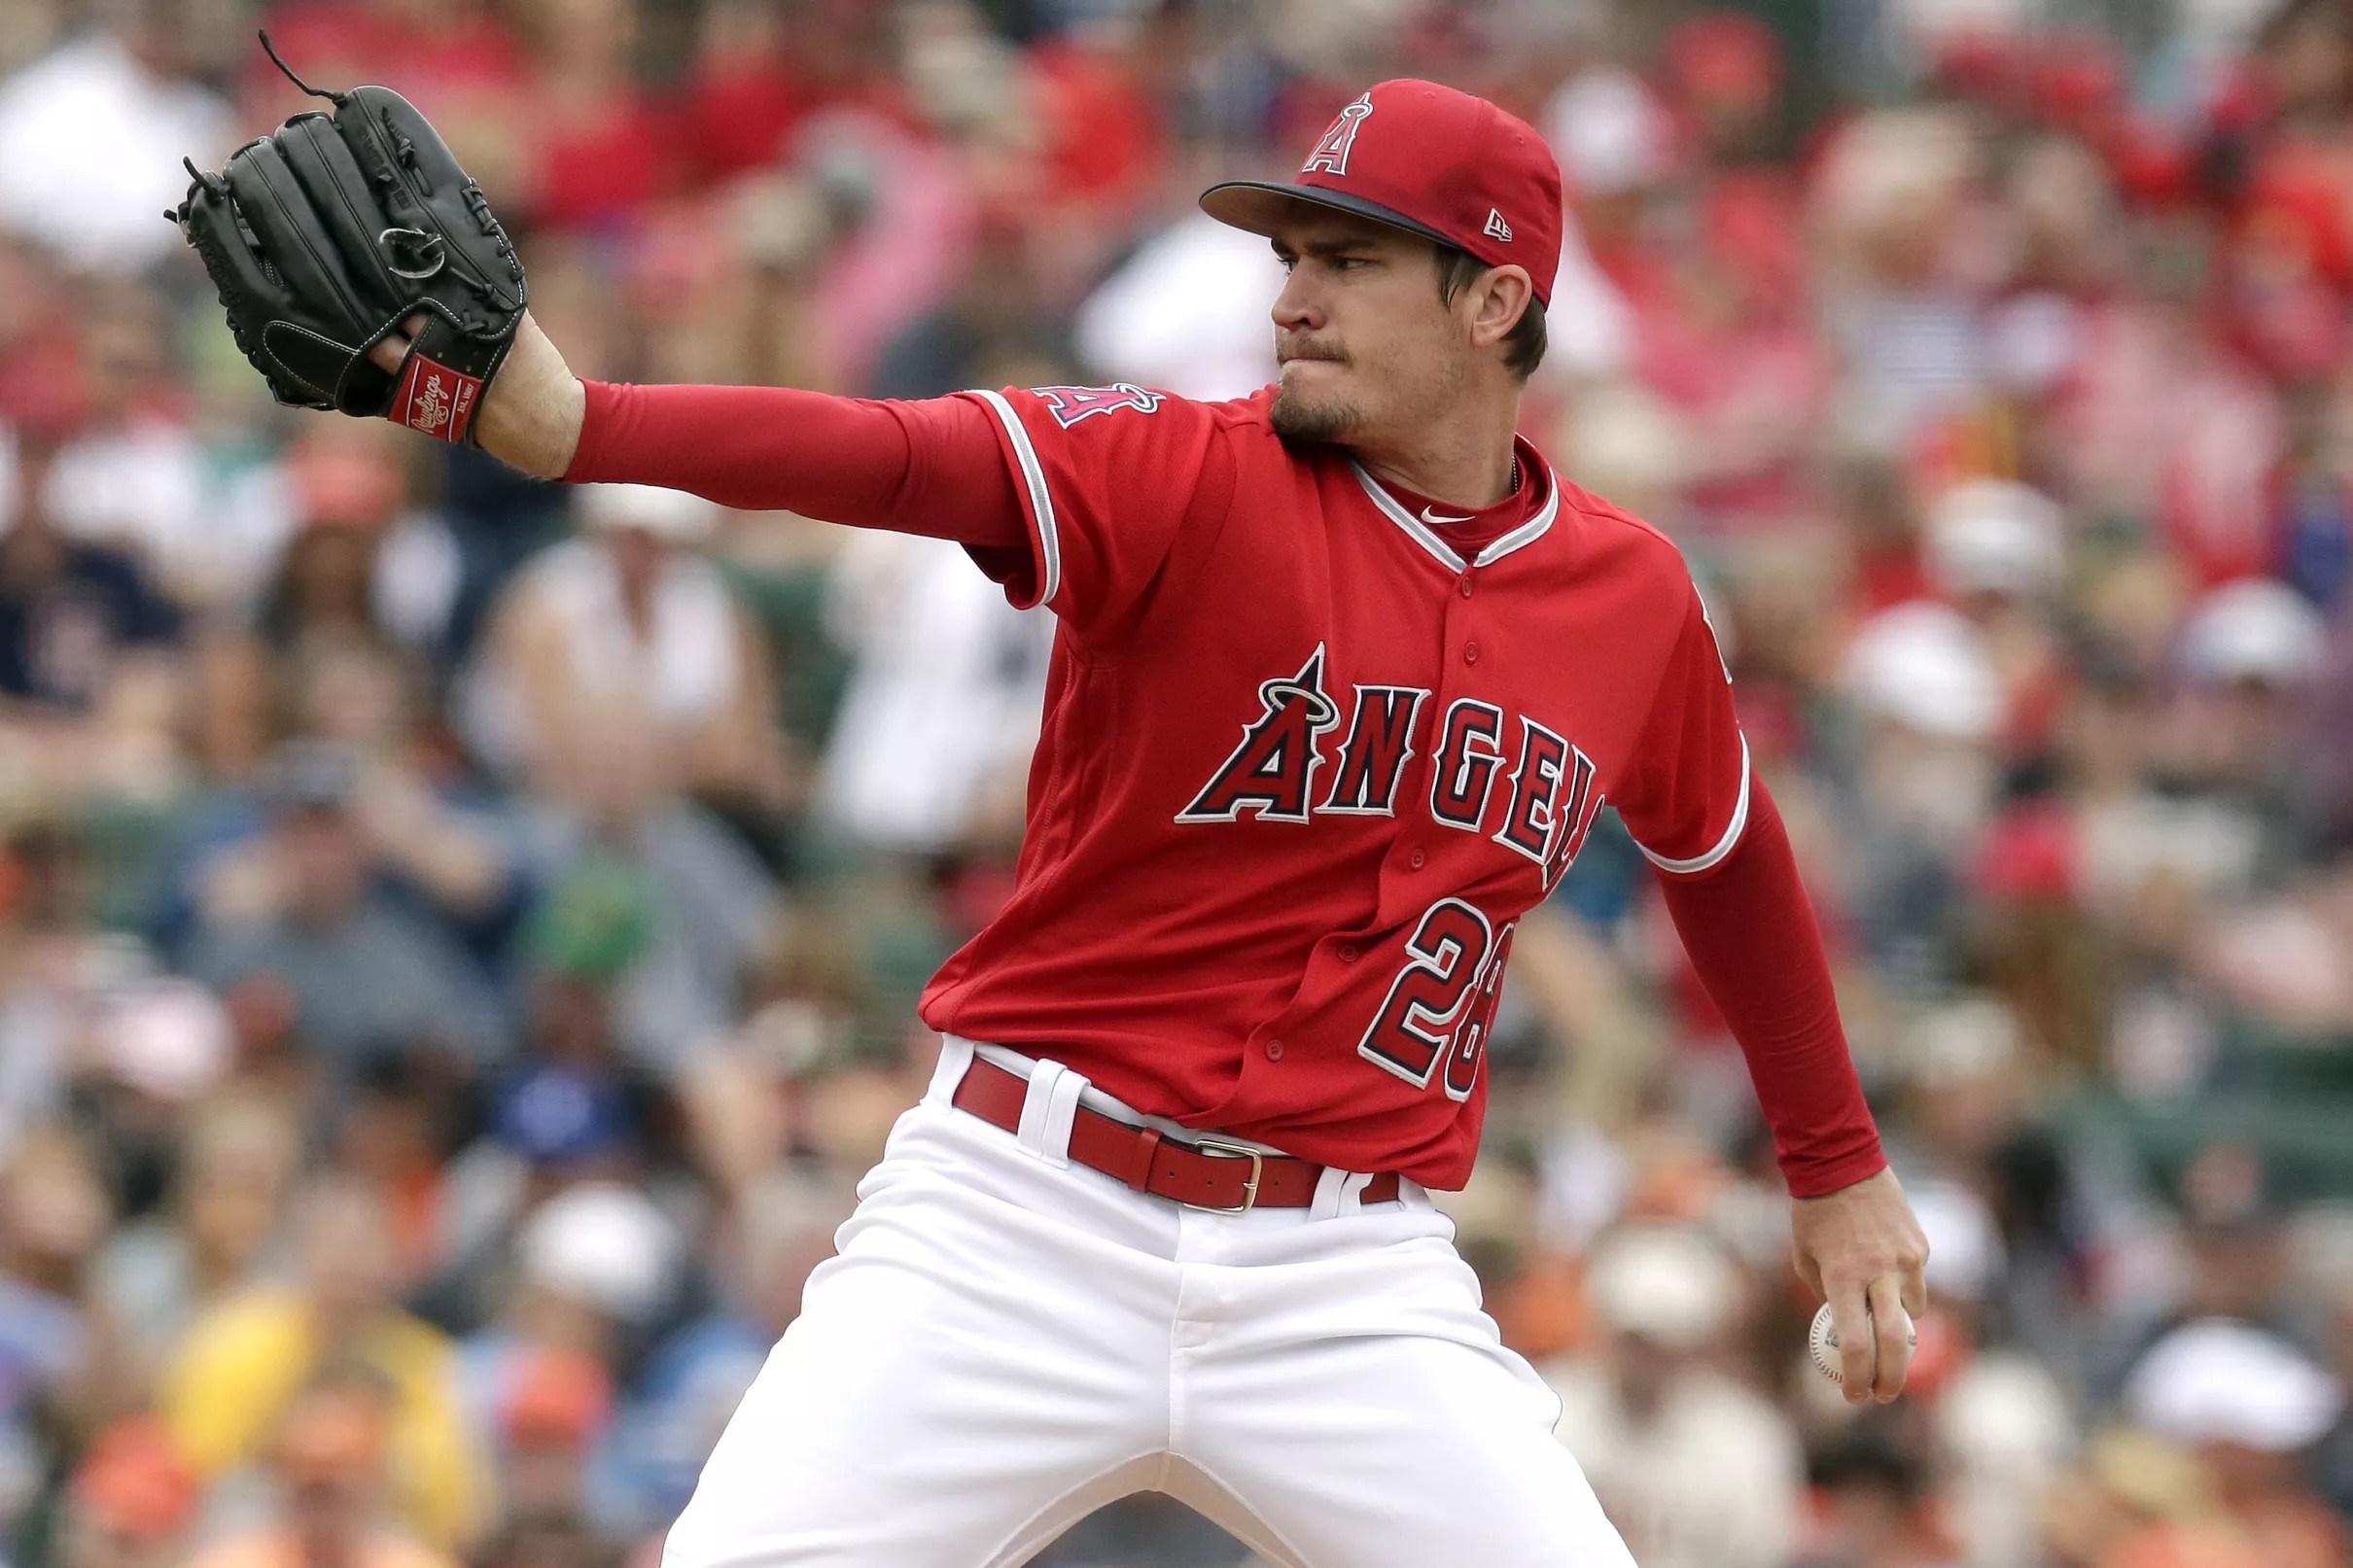 Angels rotation is starting to take shape